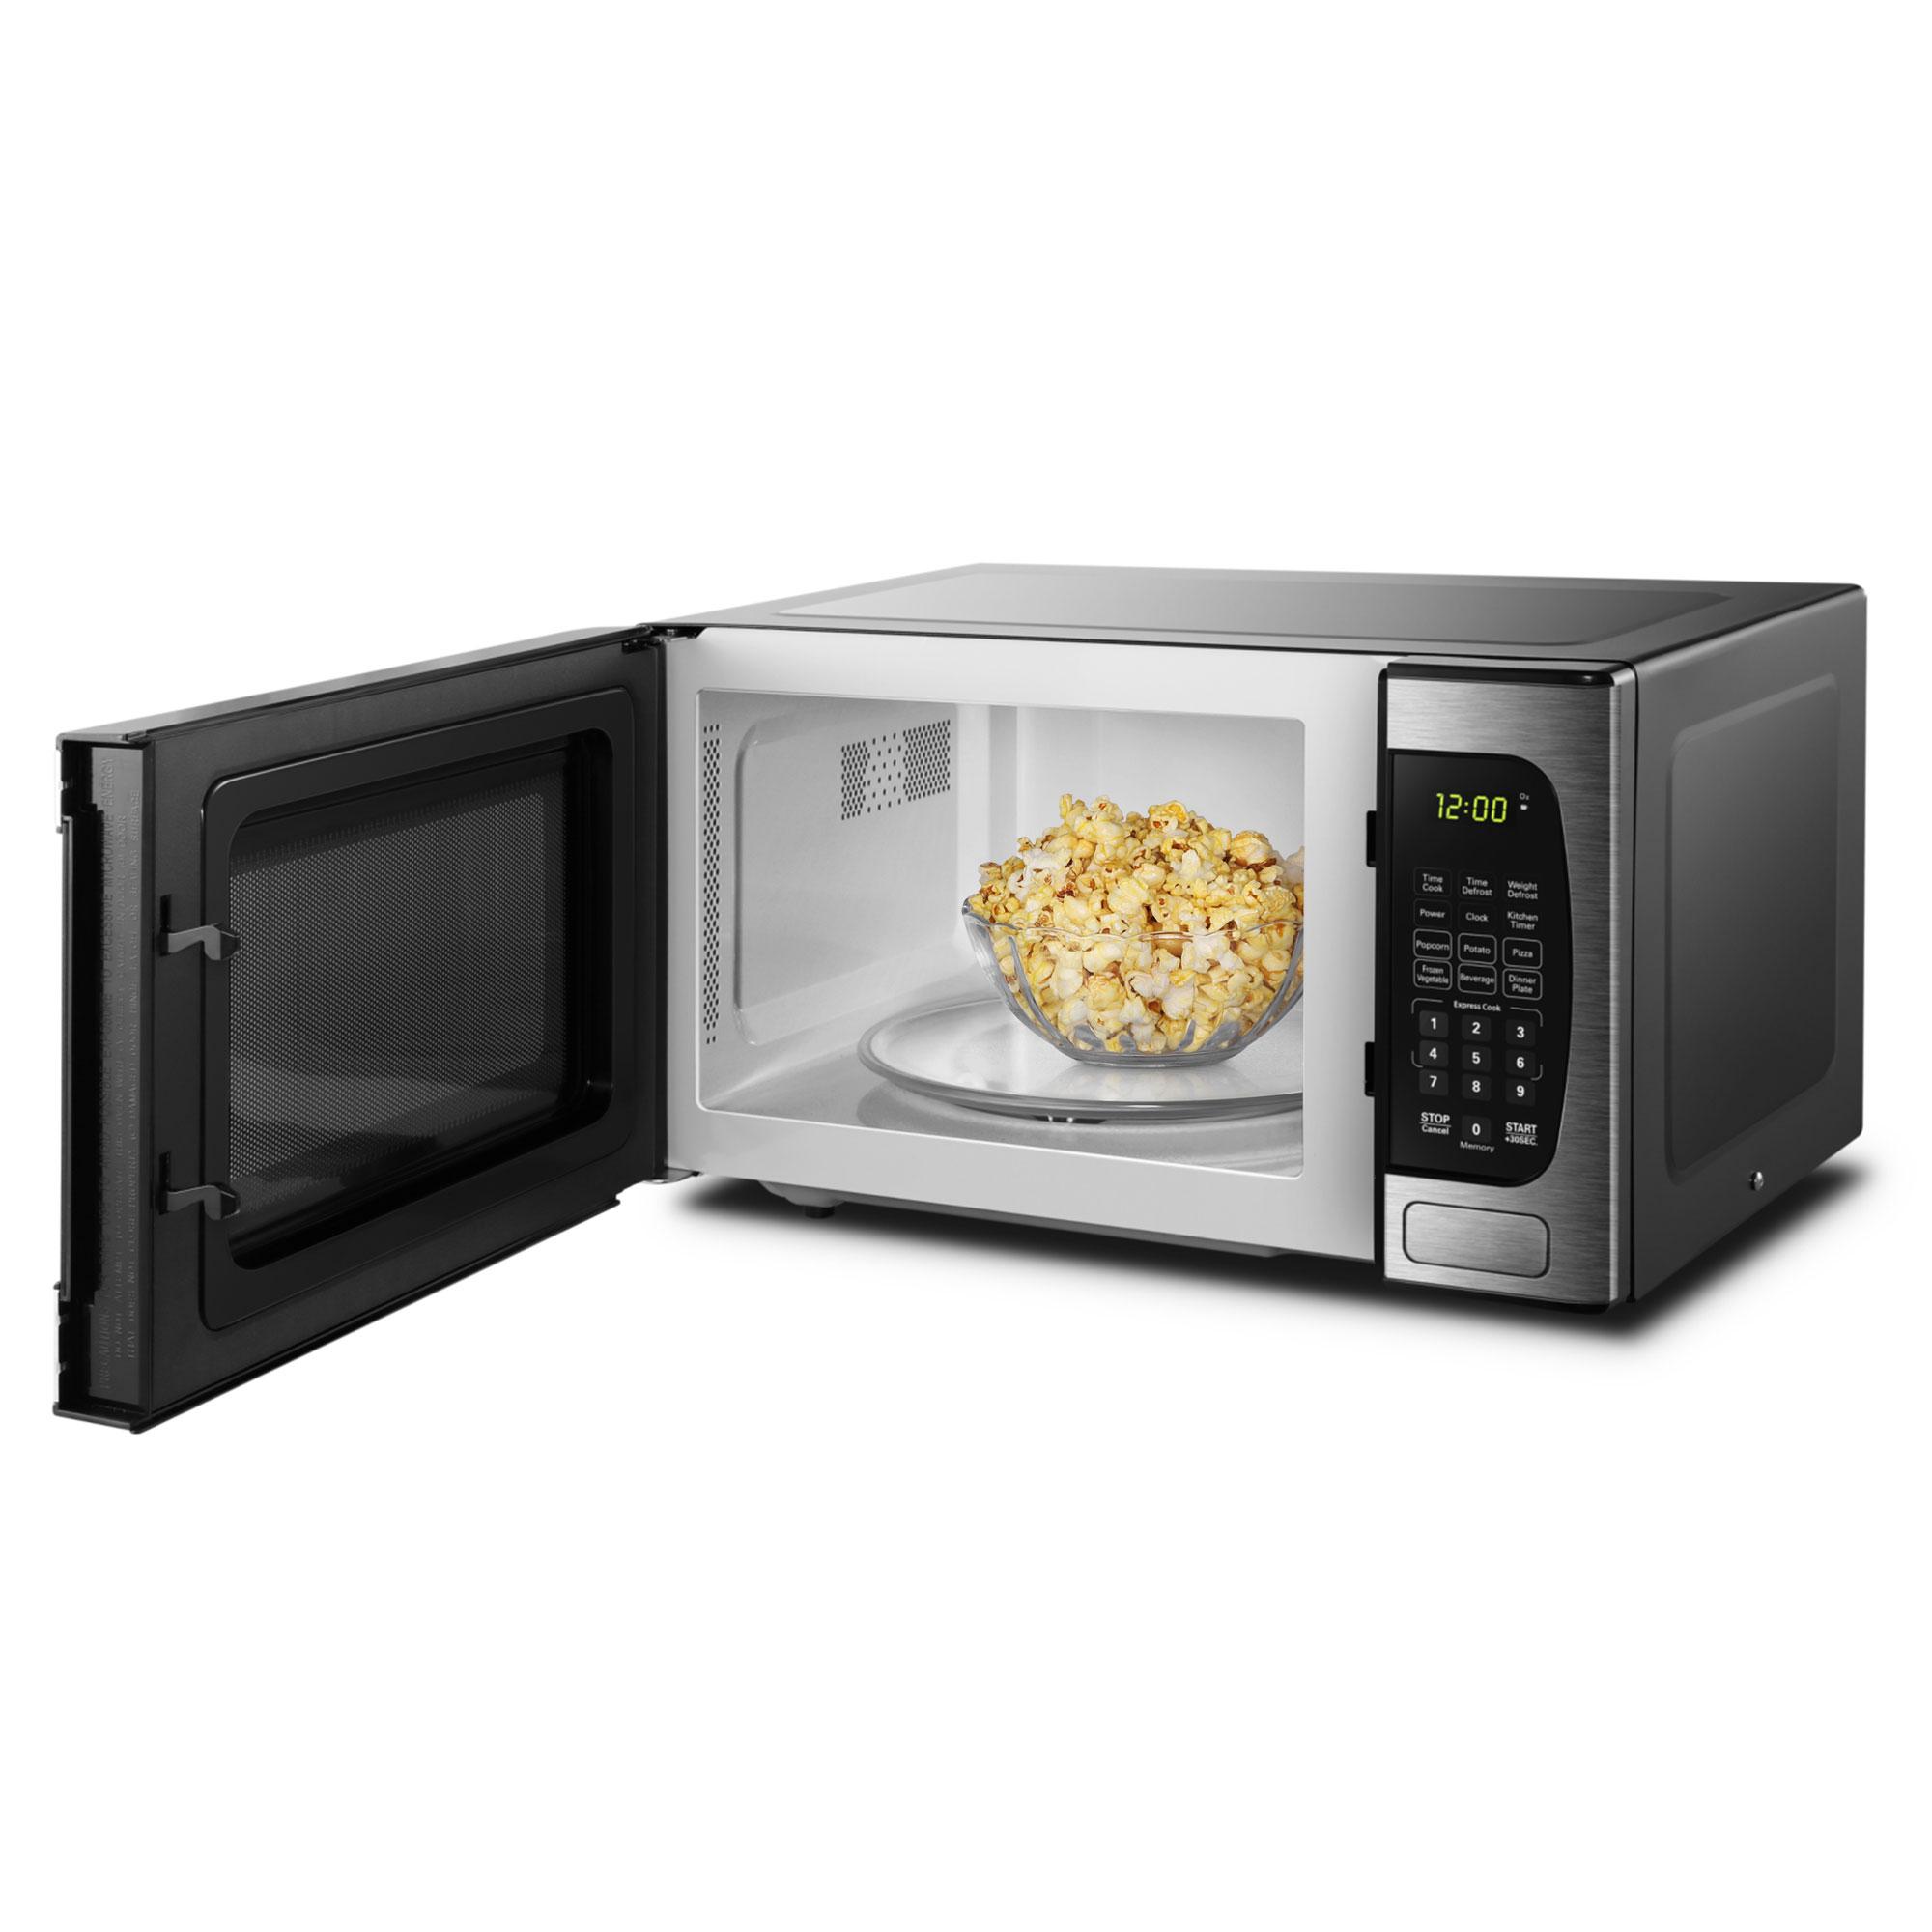 Danby DBMW0924BBS Danby 0.9 Cu Ft. Stainless Steel Microwave With Convenience Cooking Controls